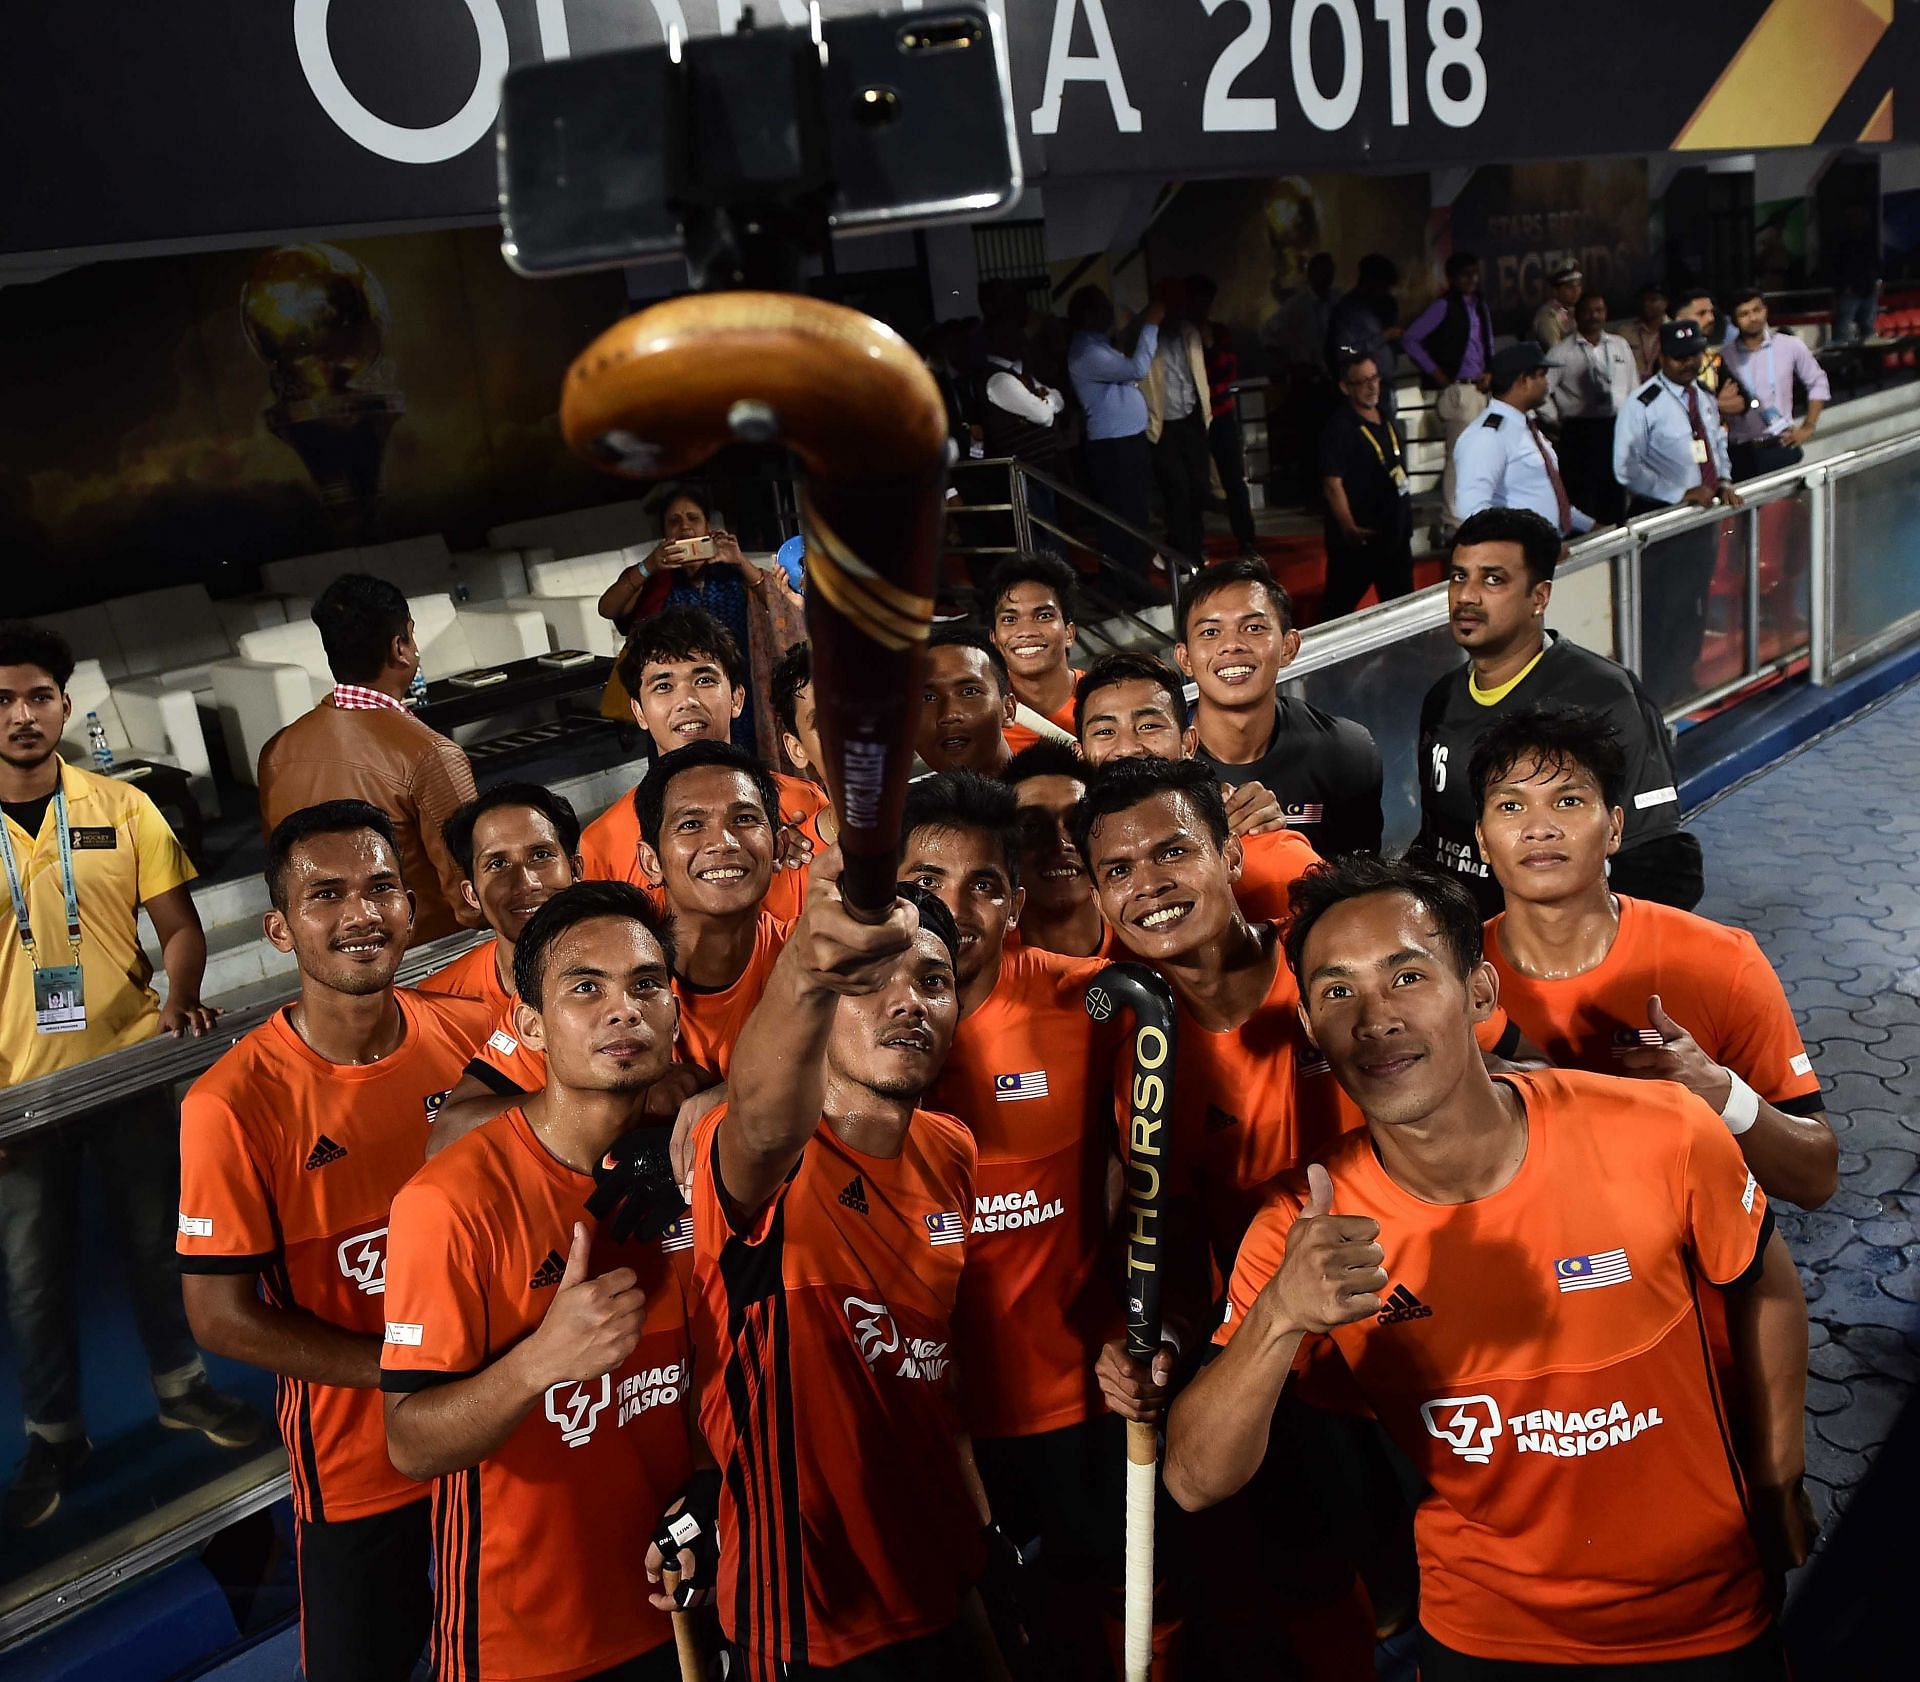 Malaysia have been known to be the giant-killers of Asian hockey and will aim for an improved performance at the 2023 FIH Hockey World Cup